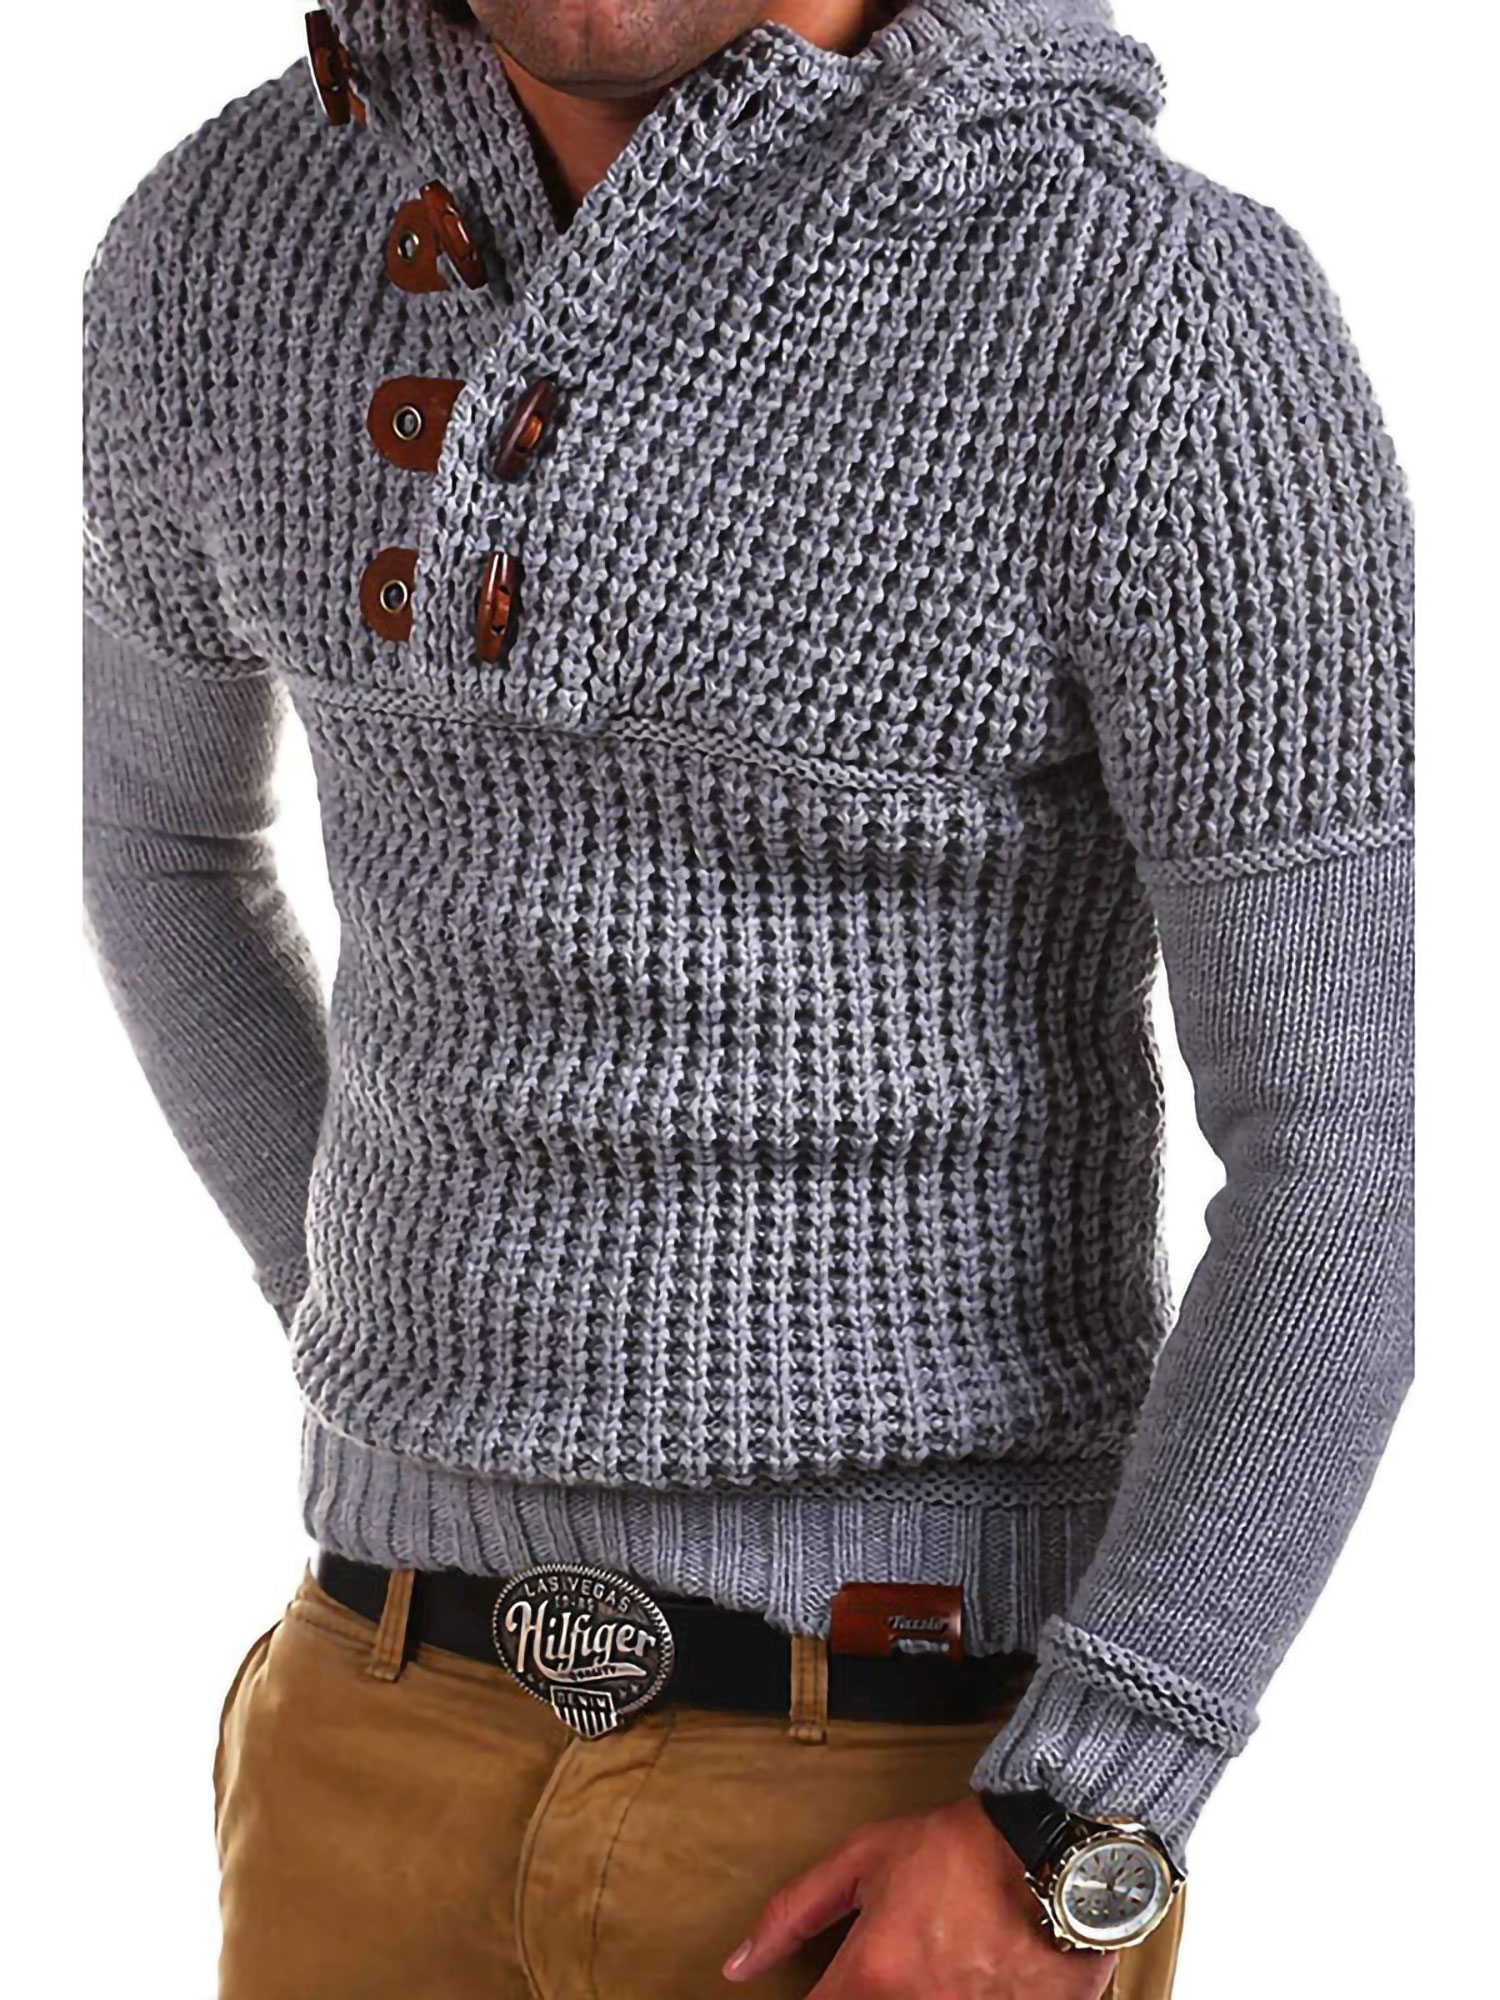 Avamo Mens V Neck Knitted Workout Pullover Sweater Cable Knit Jumper Adults Stylish Knitwear Horn Button Sweaters with Hood - image 1 of 2